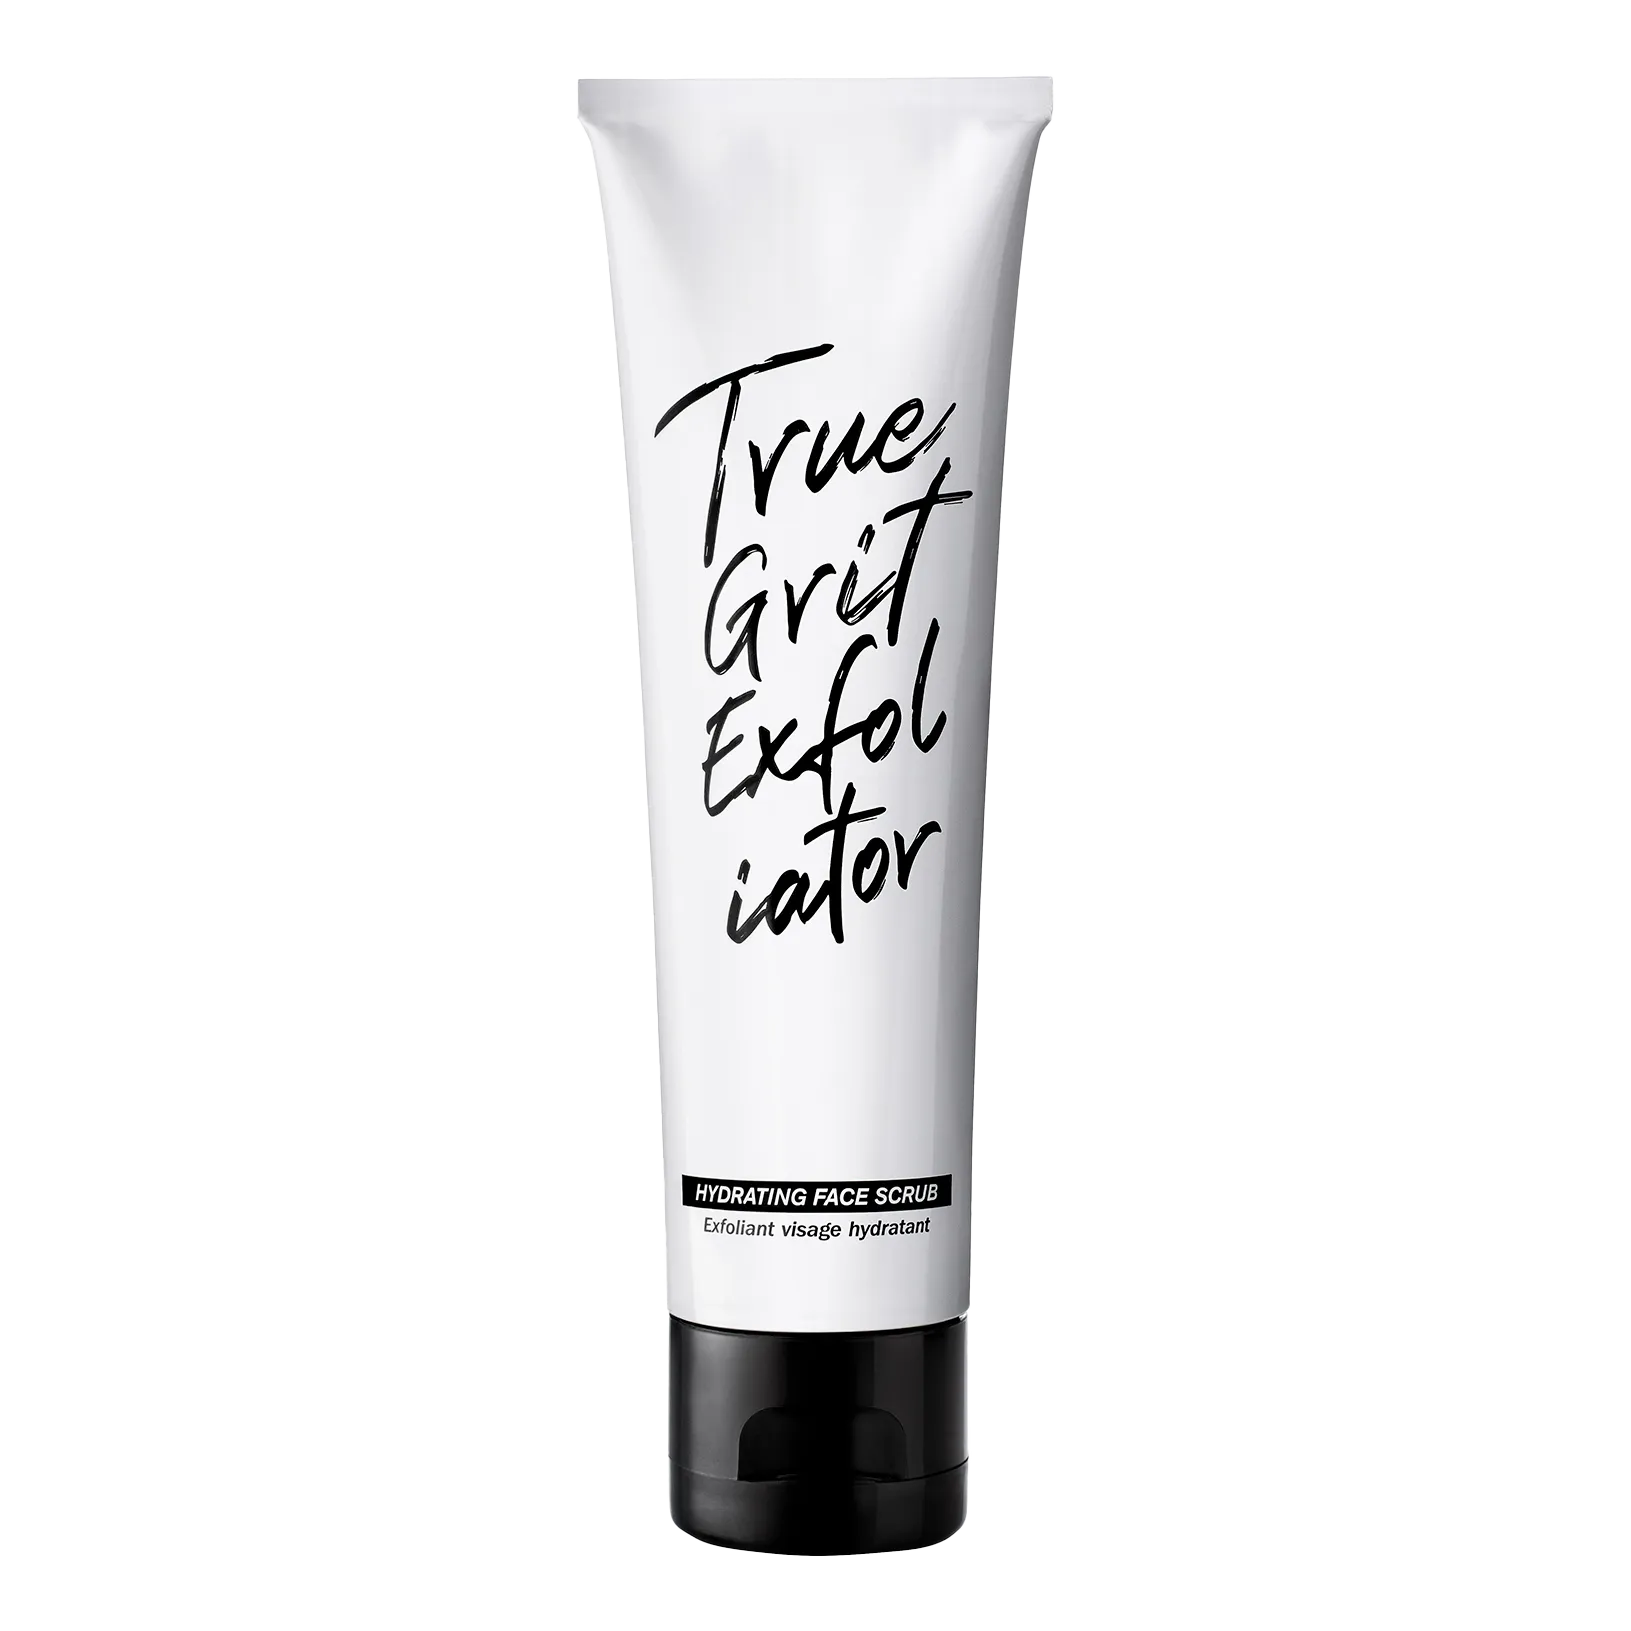 Doers of London Hydrating Face Scrub 